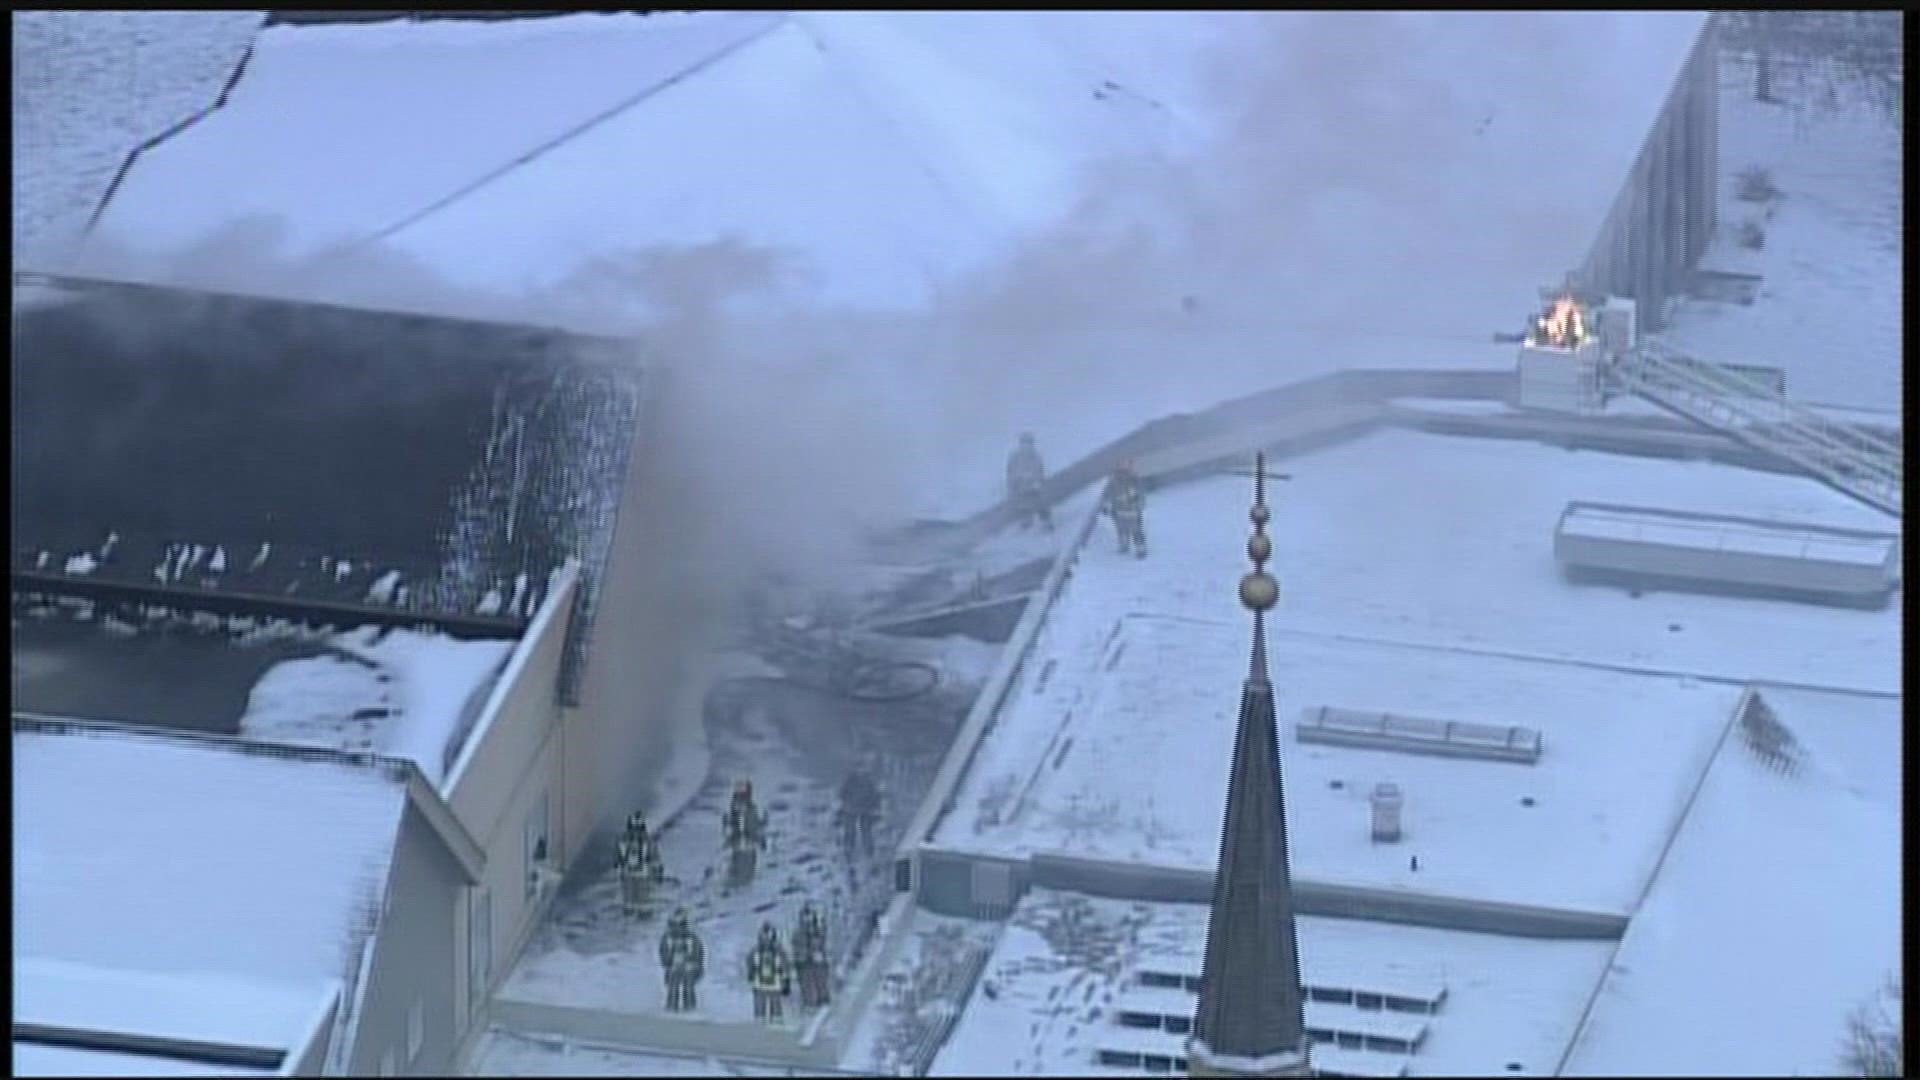 Both the Woodbury and Cottage Grove Fire Departments are battling the blaze.